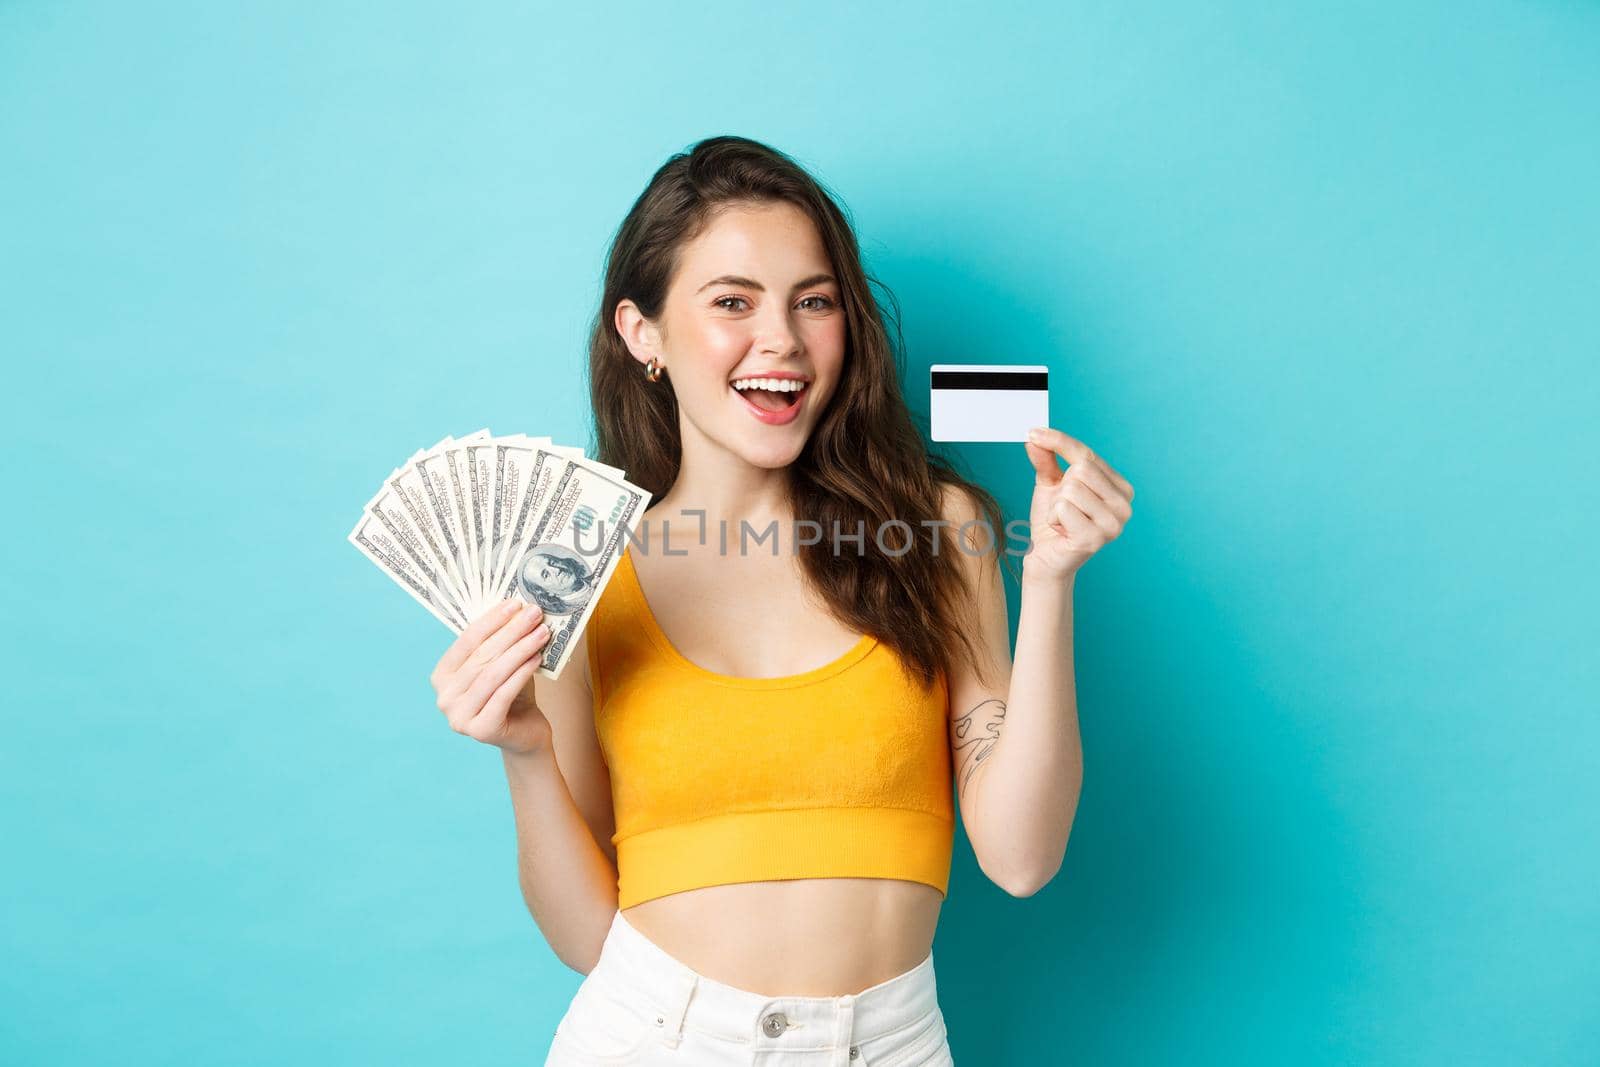 Image of lucky good-looking girl showing plastic credit card and money, holding dollar bills, standing over blue background. Copy space